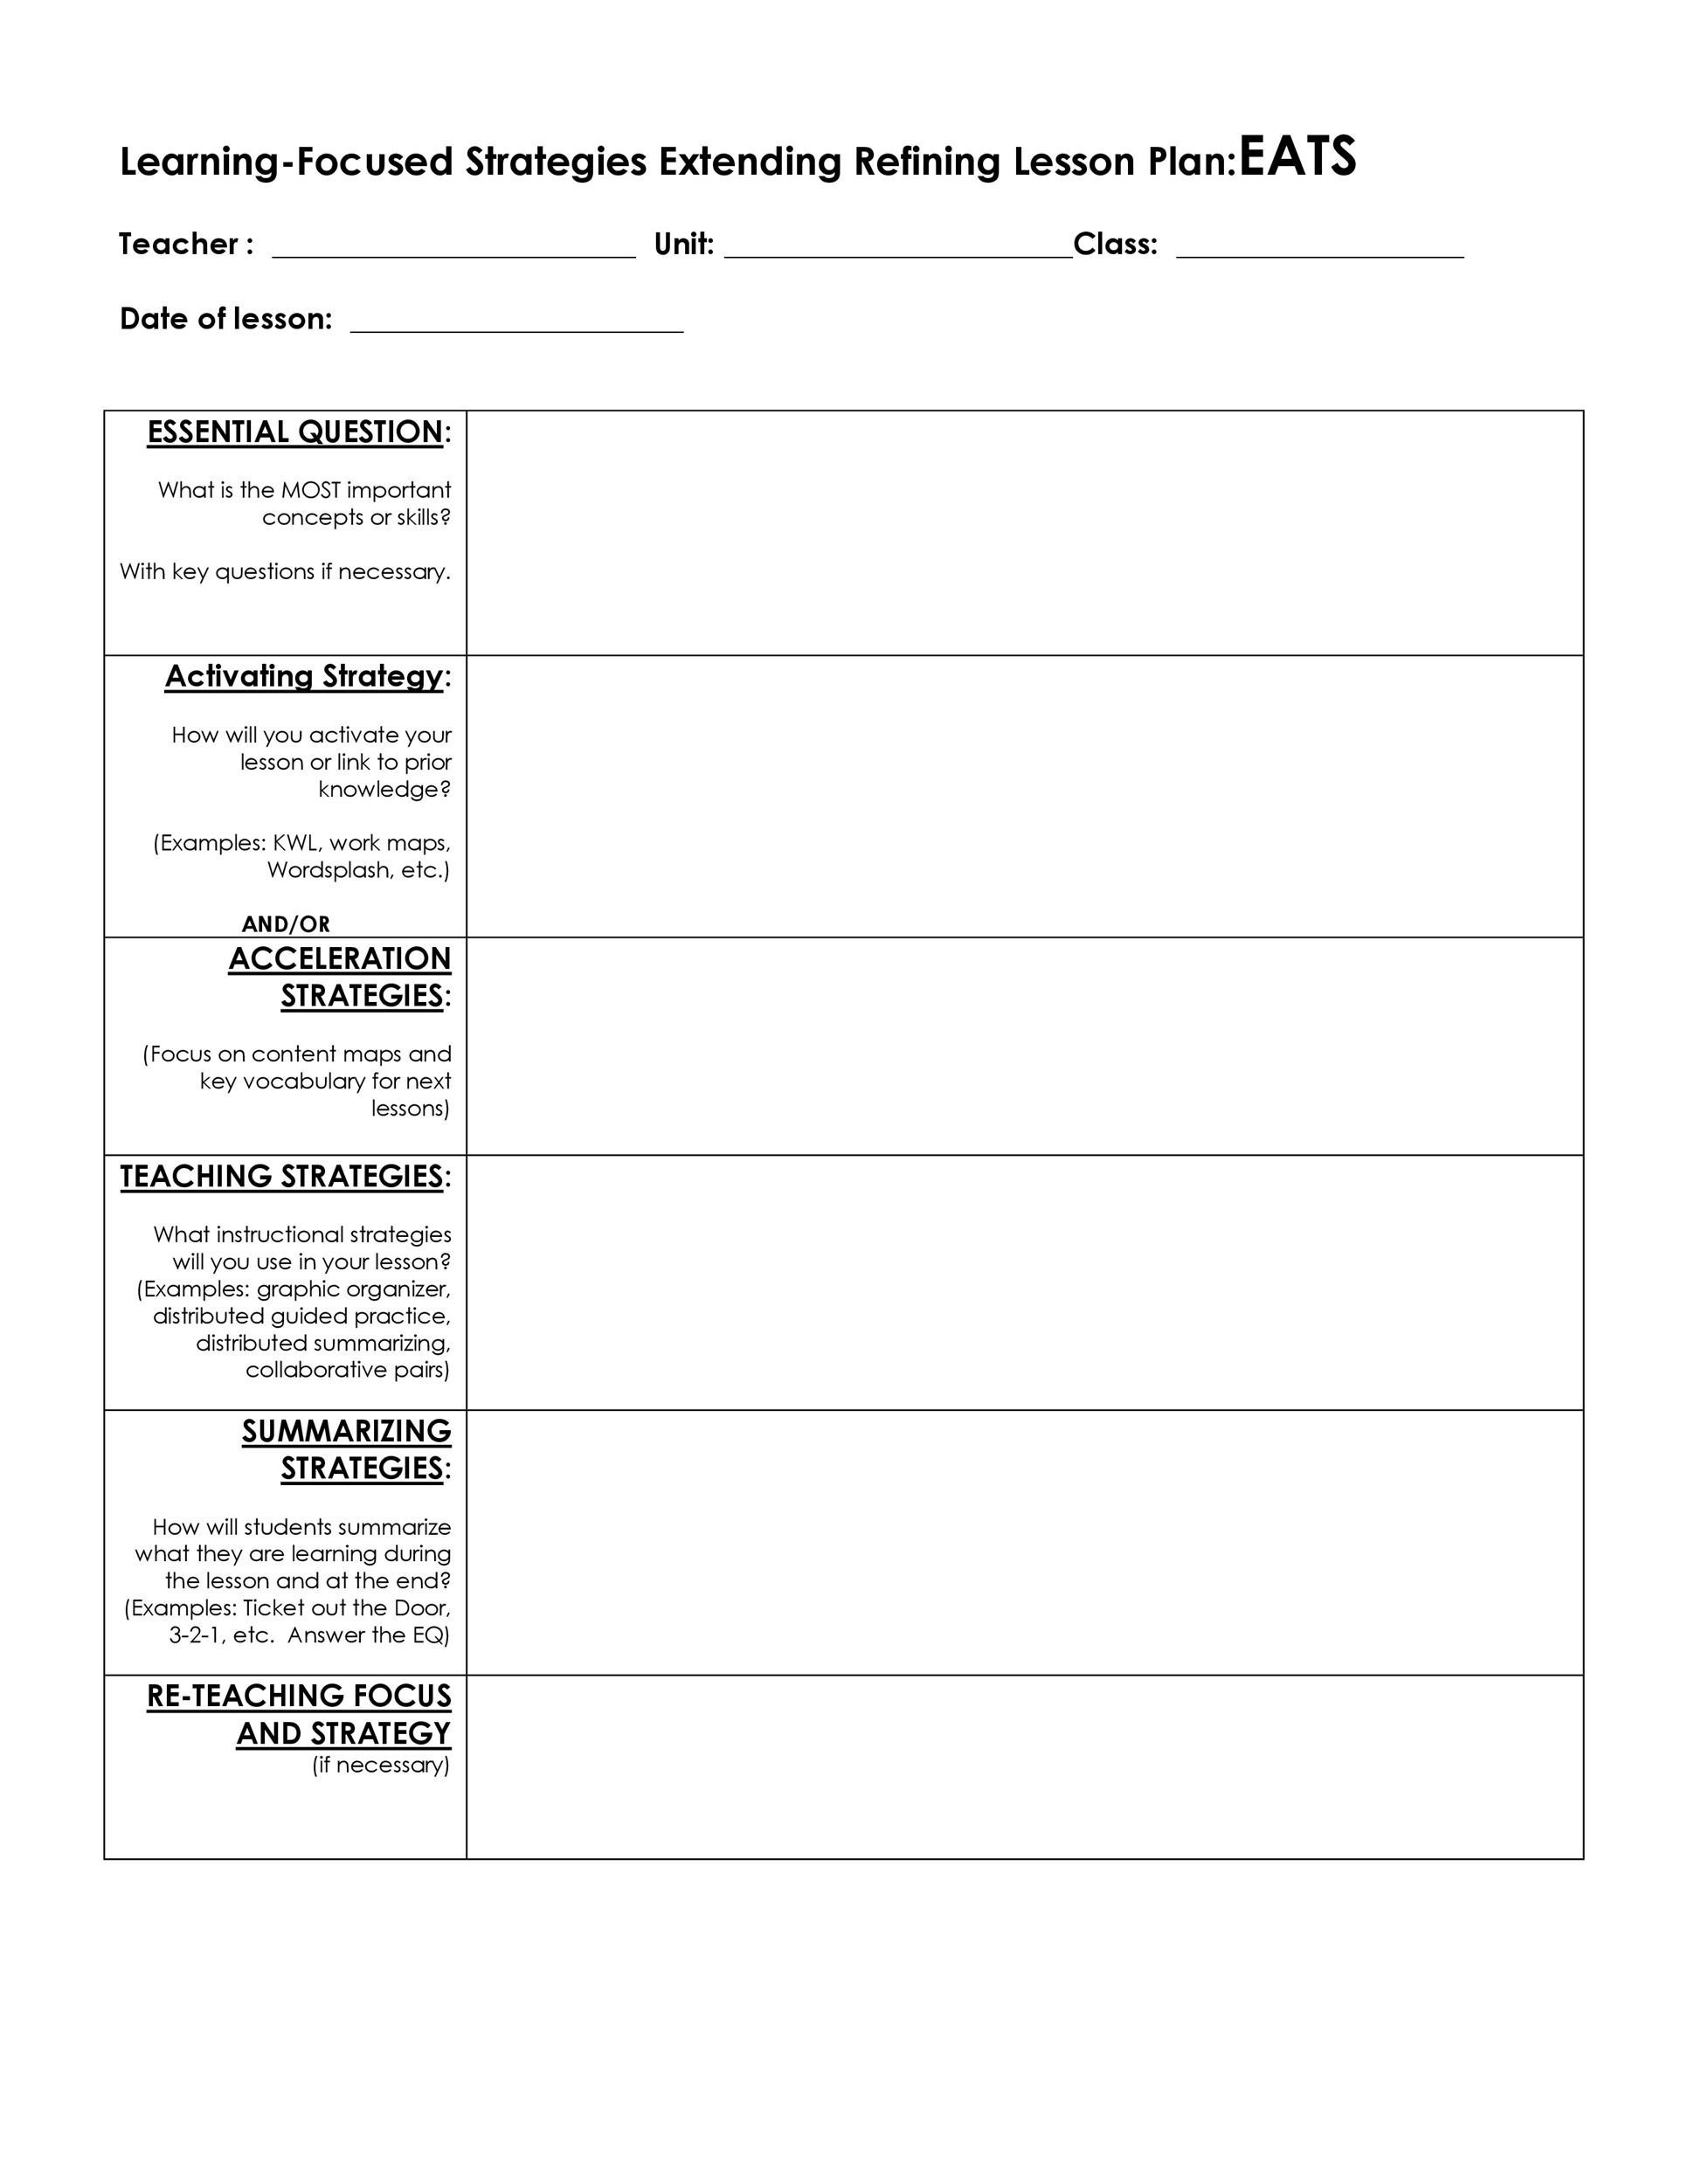 How to write a lesson plan template